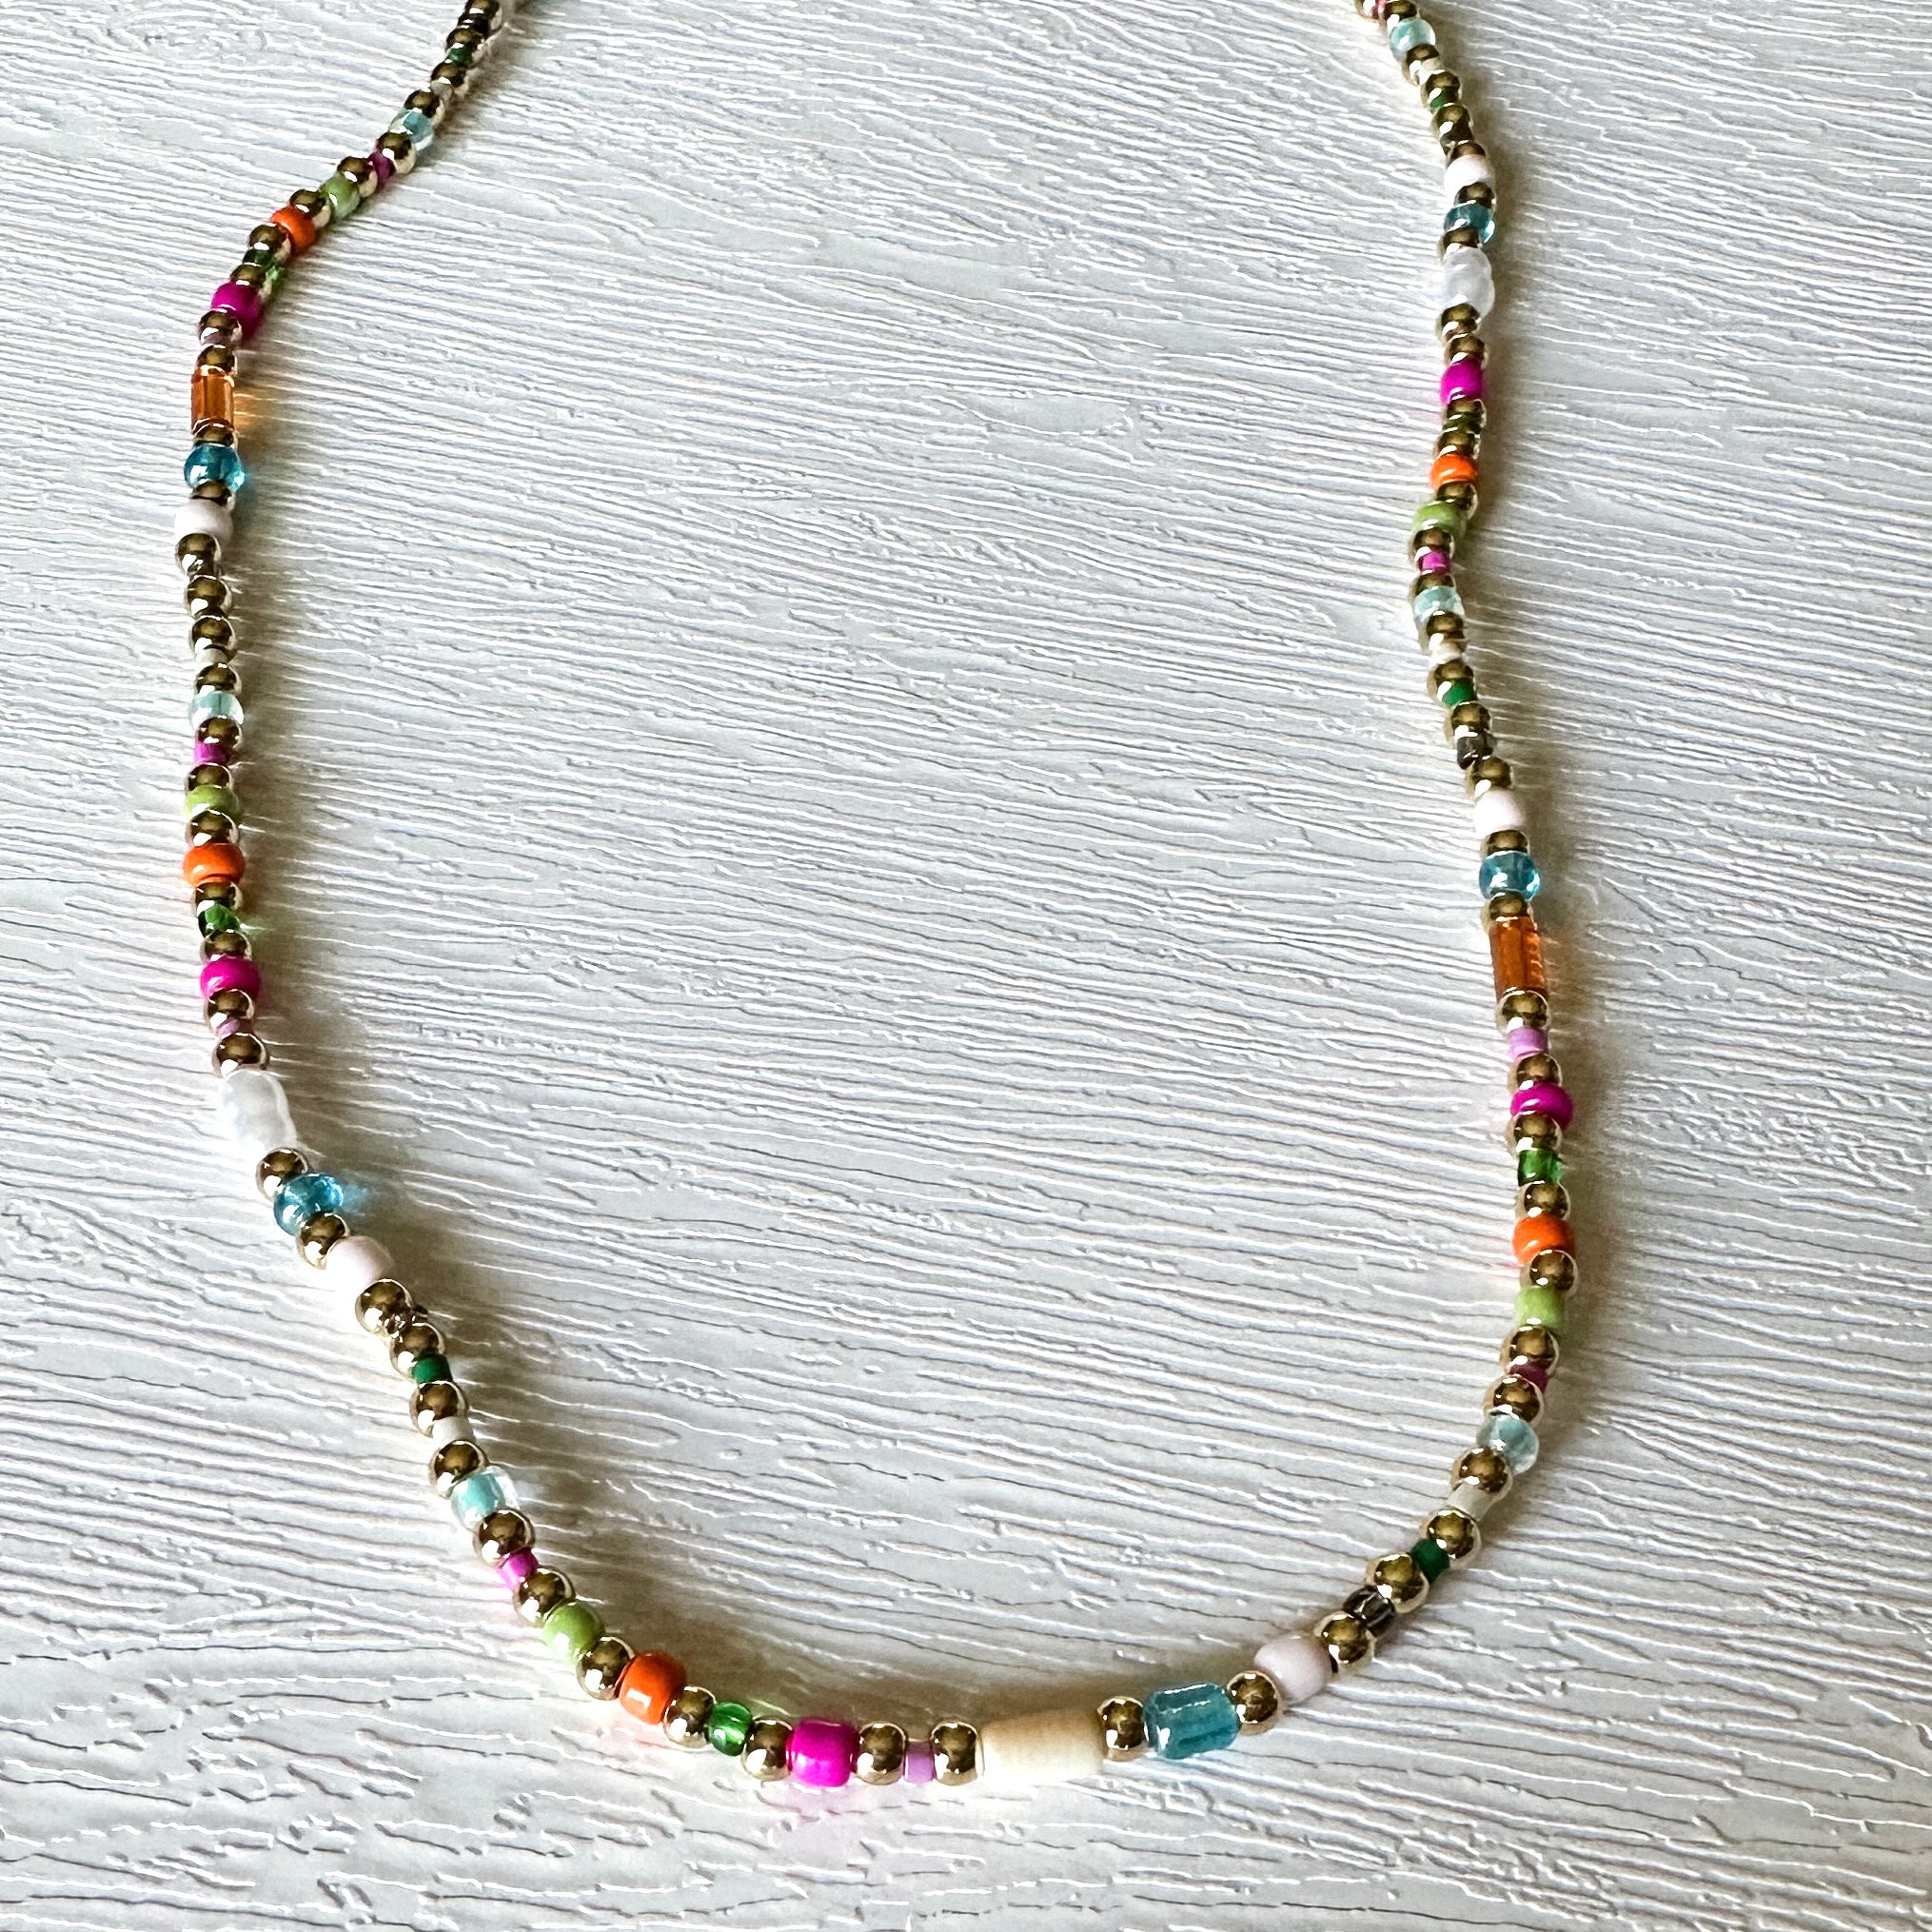 Beaded Chain Necklace - LAST ONE